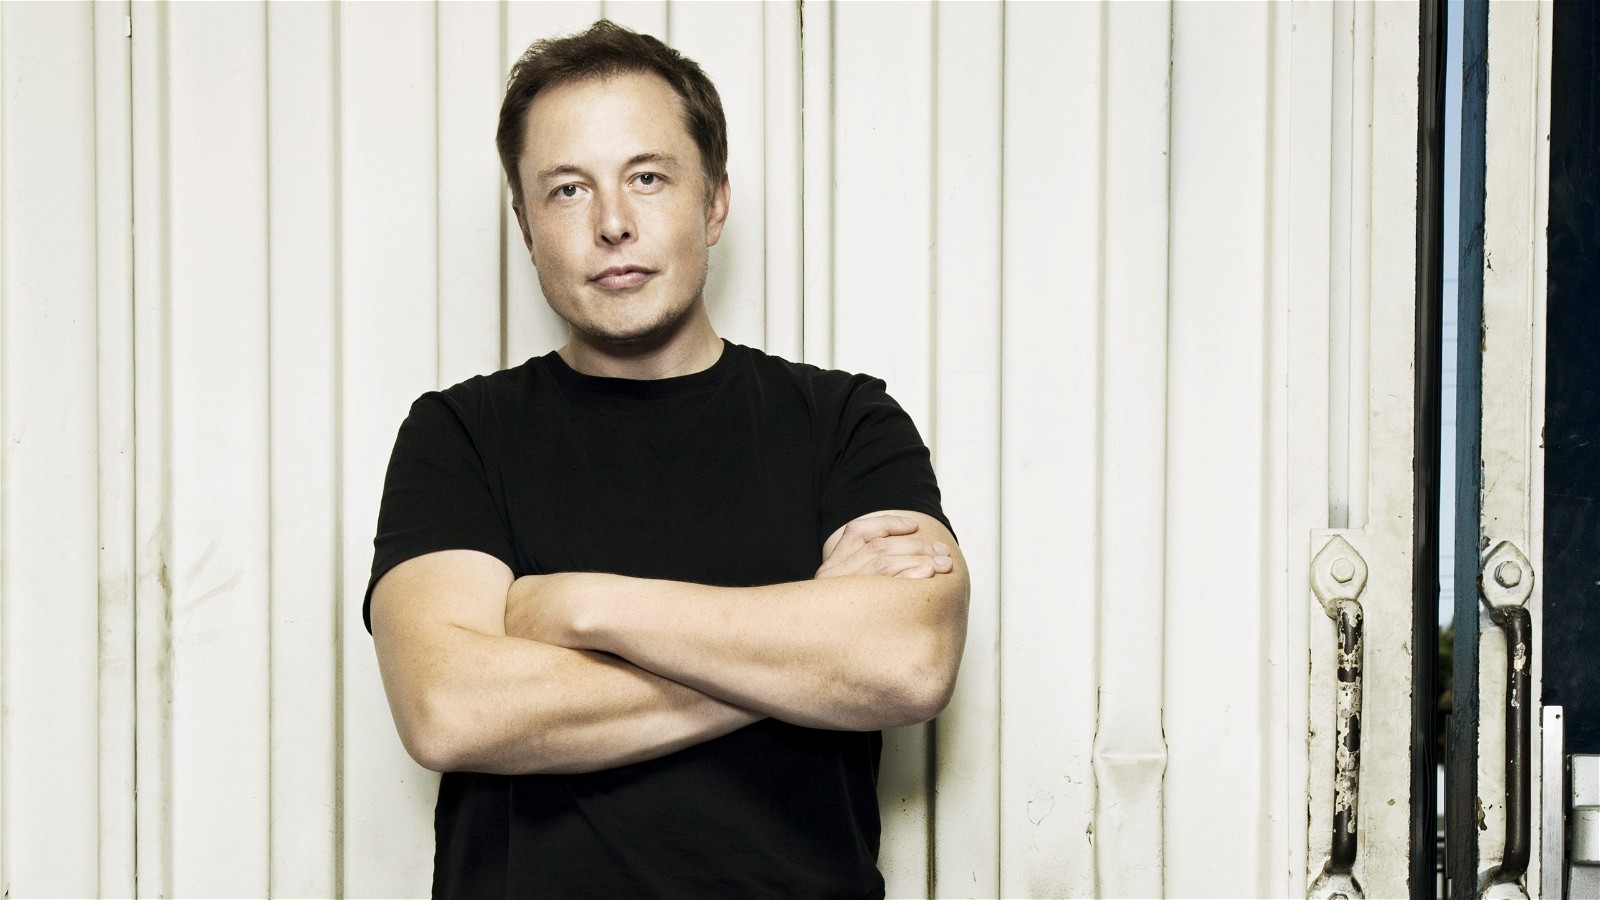 Elon Musk, the billionaire, a business magnate and an invester.